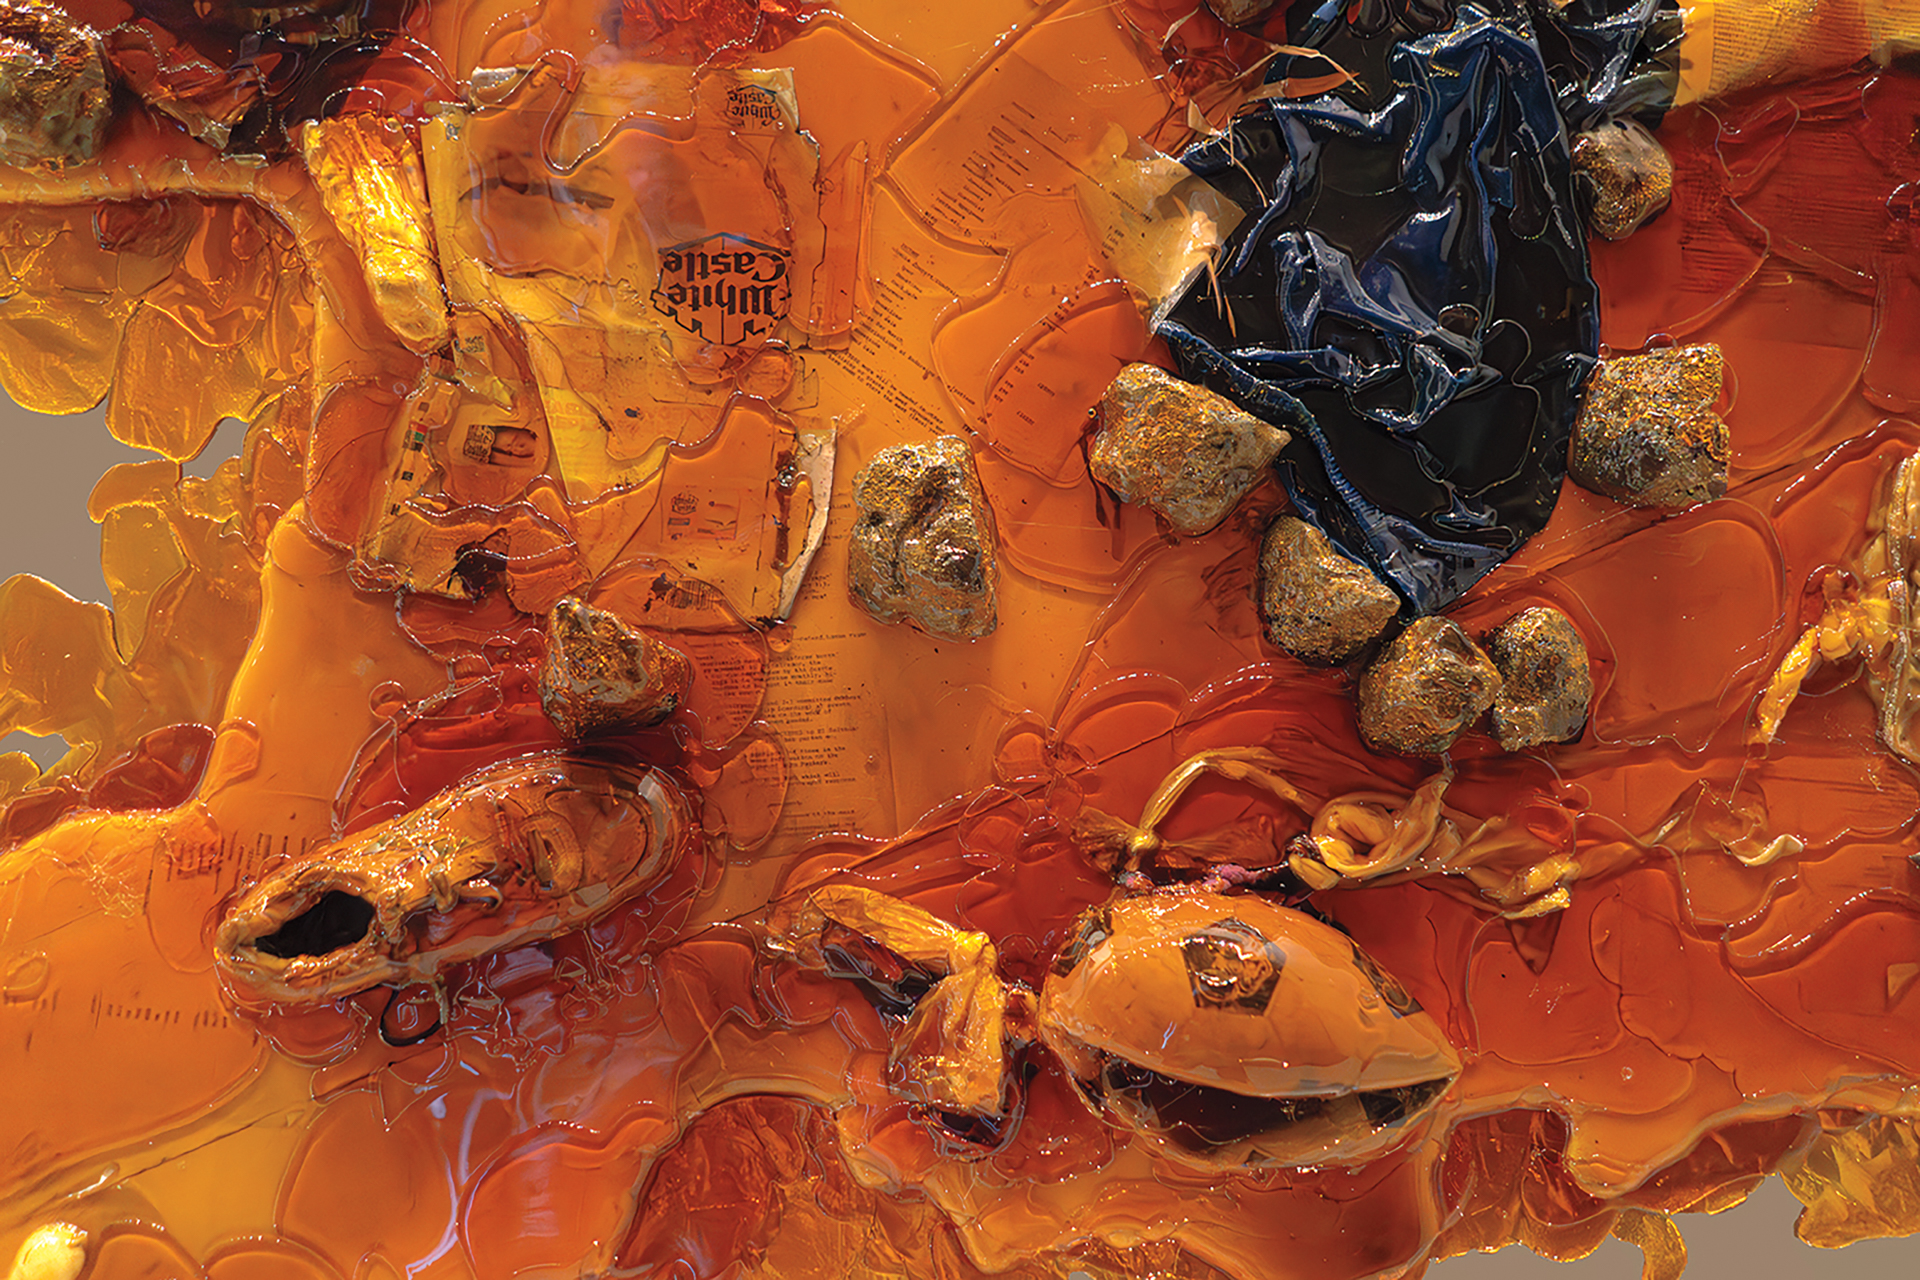 Detail of a floorpiece made from various objects, like clothing, shoes, rocks, paper that have been covered with amber that has hardened.